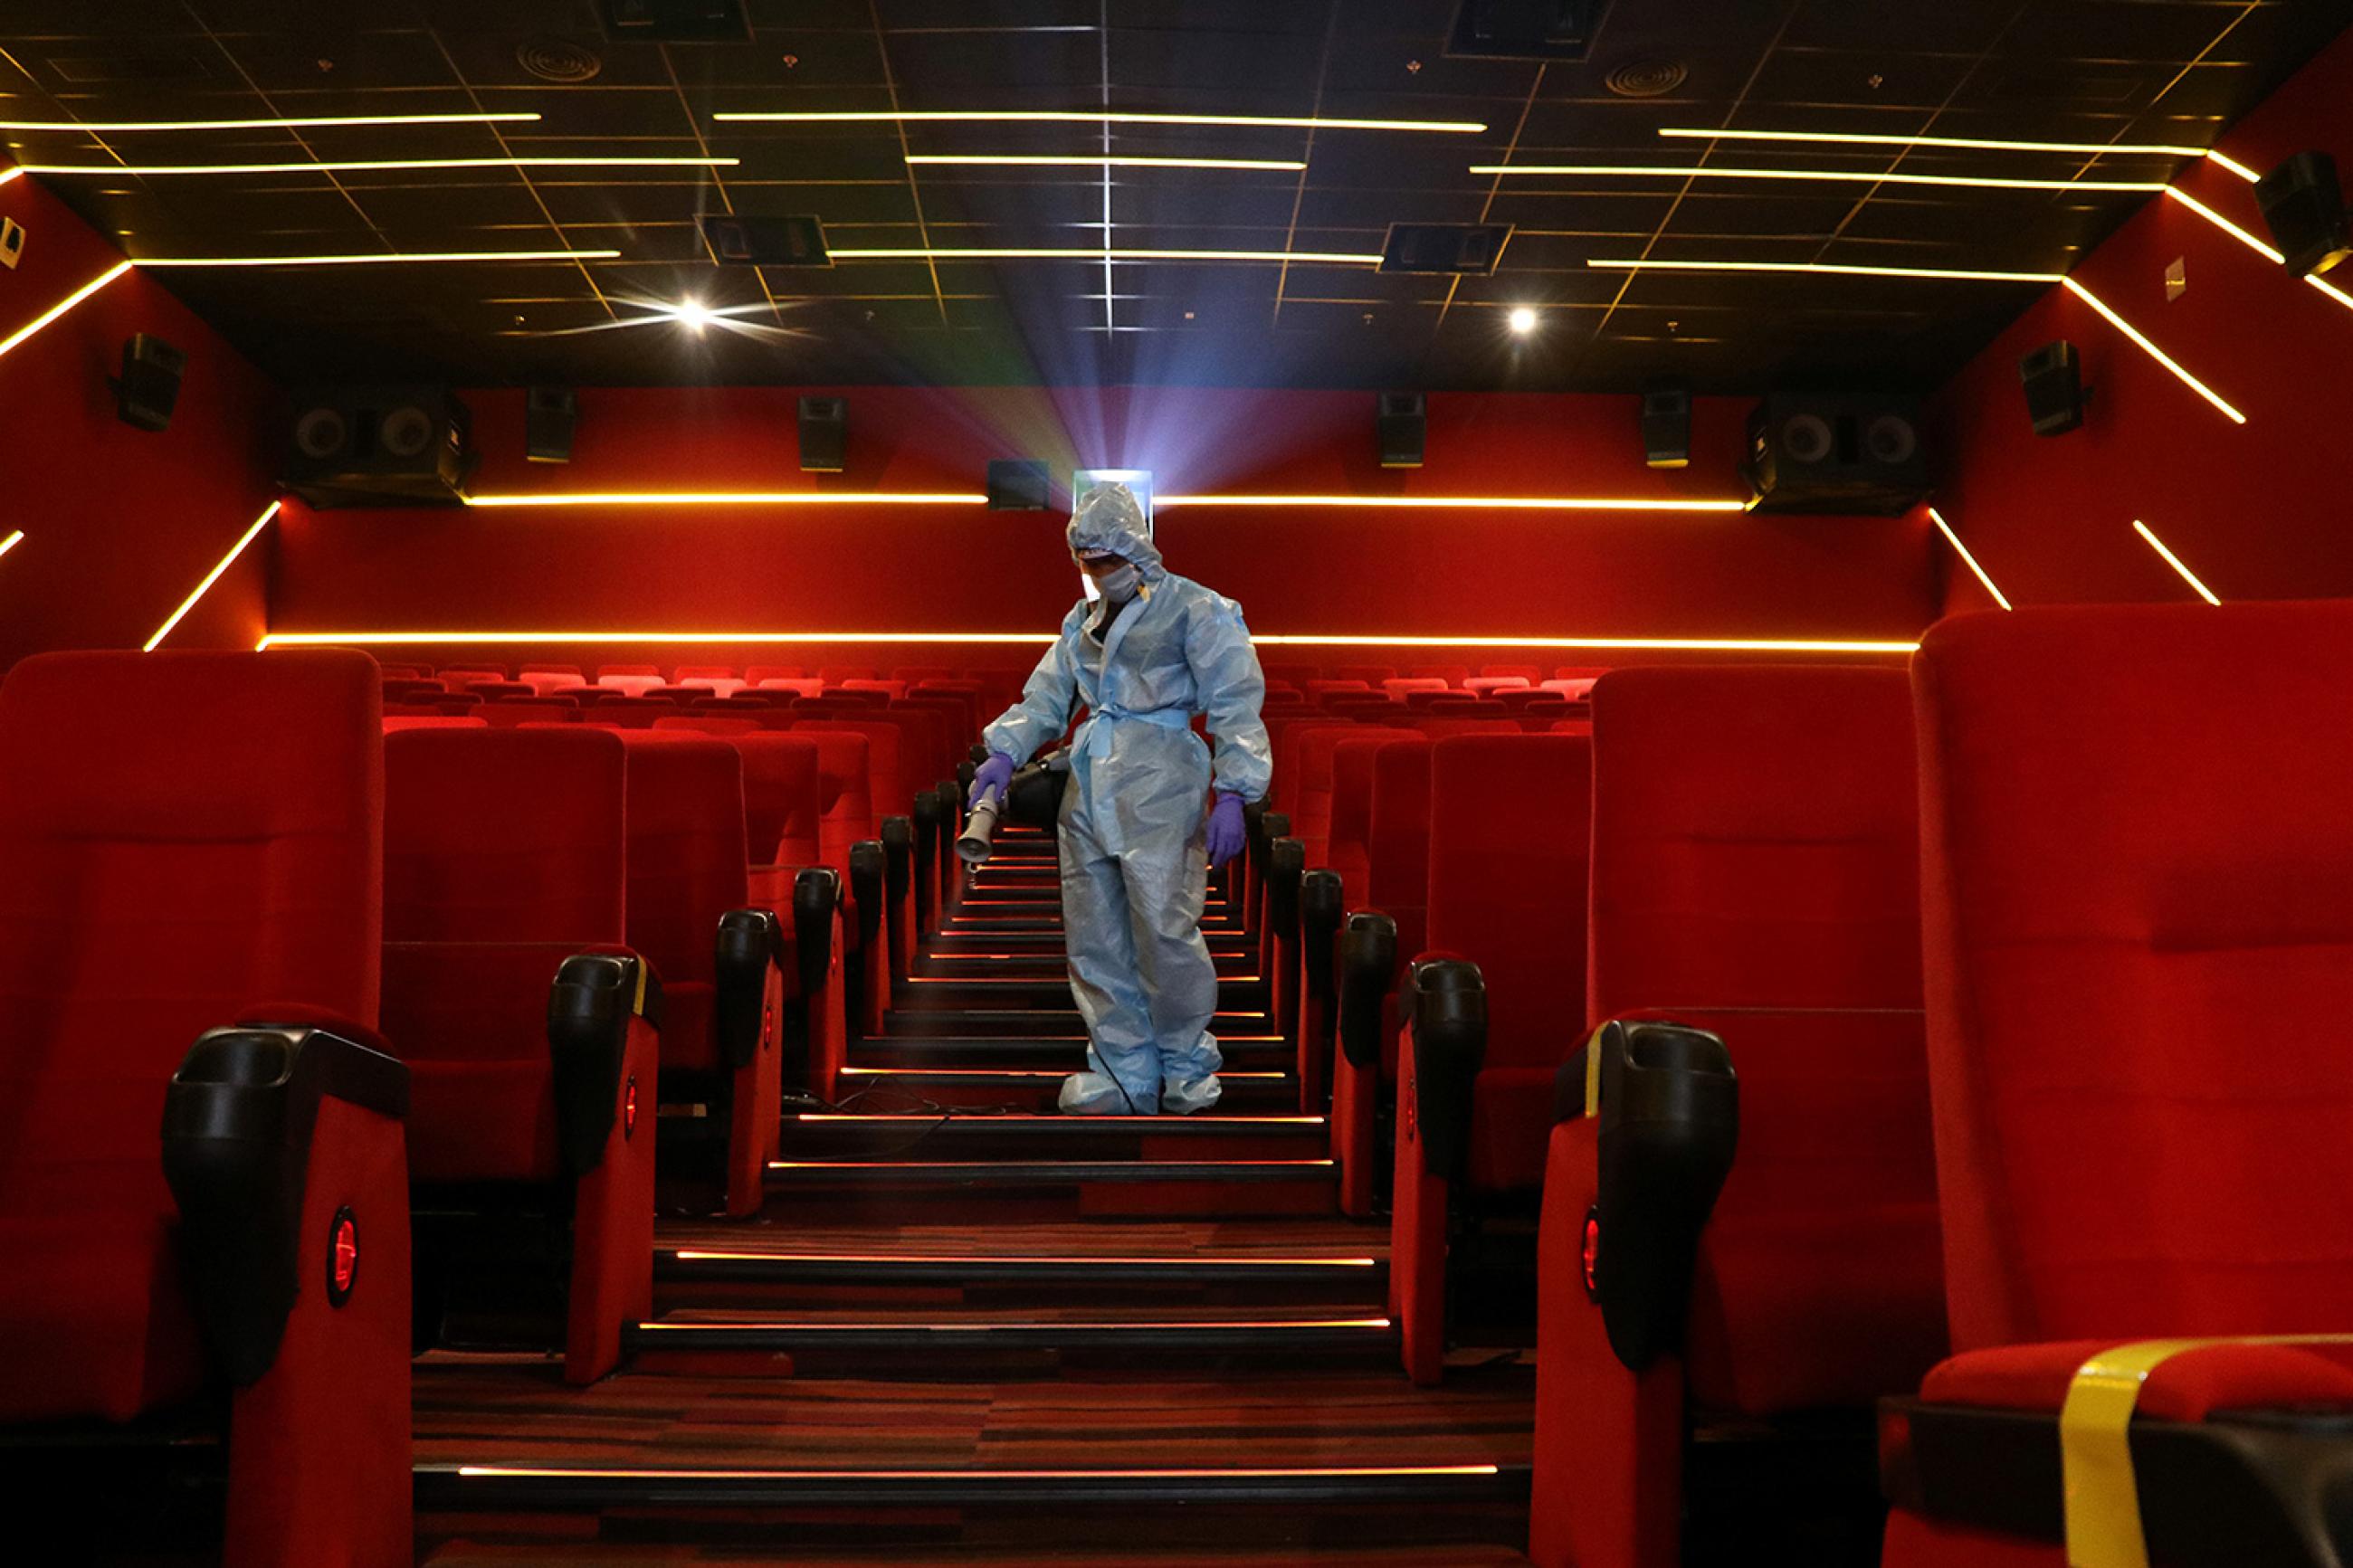 Addressing pandemic preparedness after COVID-19 will require going deeper than the surface. Here a worker sanitizes surfaces inside the Inox Leisure movie theatre in Mumbai, India, October 13, 2020. The photo is striking, showing a worker spraying disinfectant wearing a blue suit descending down a theater staircase where all the seats and carpet are bright red. REUTERS/Niharika Kulkarni